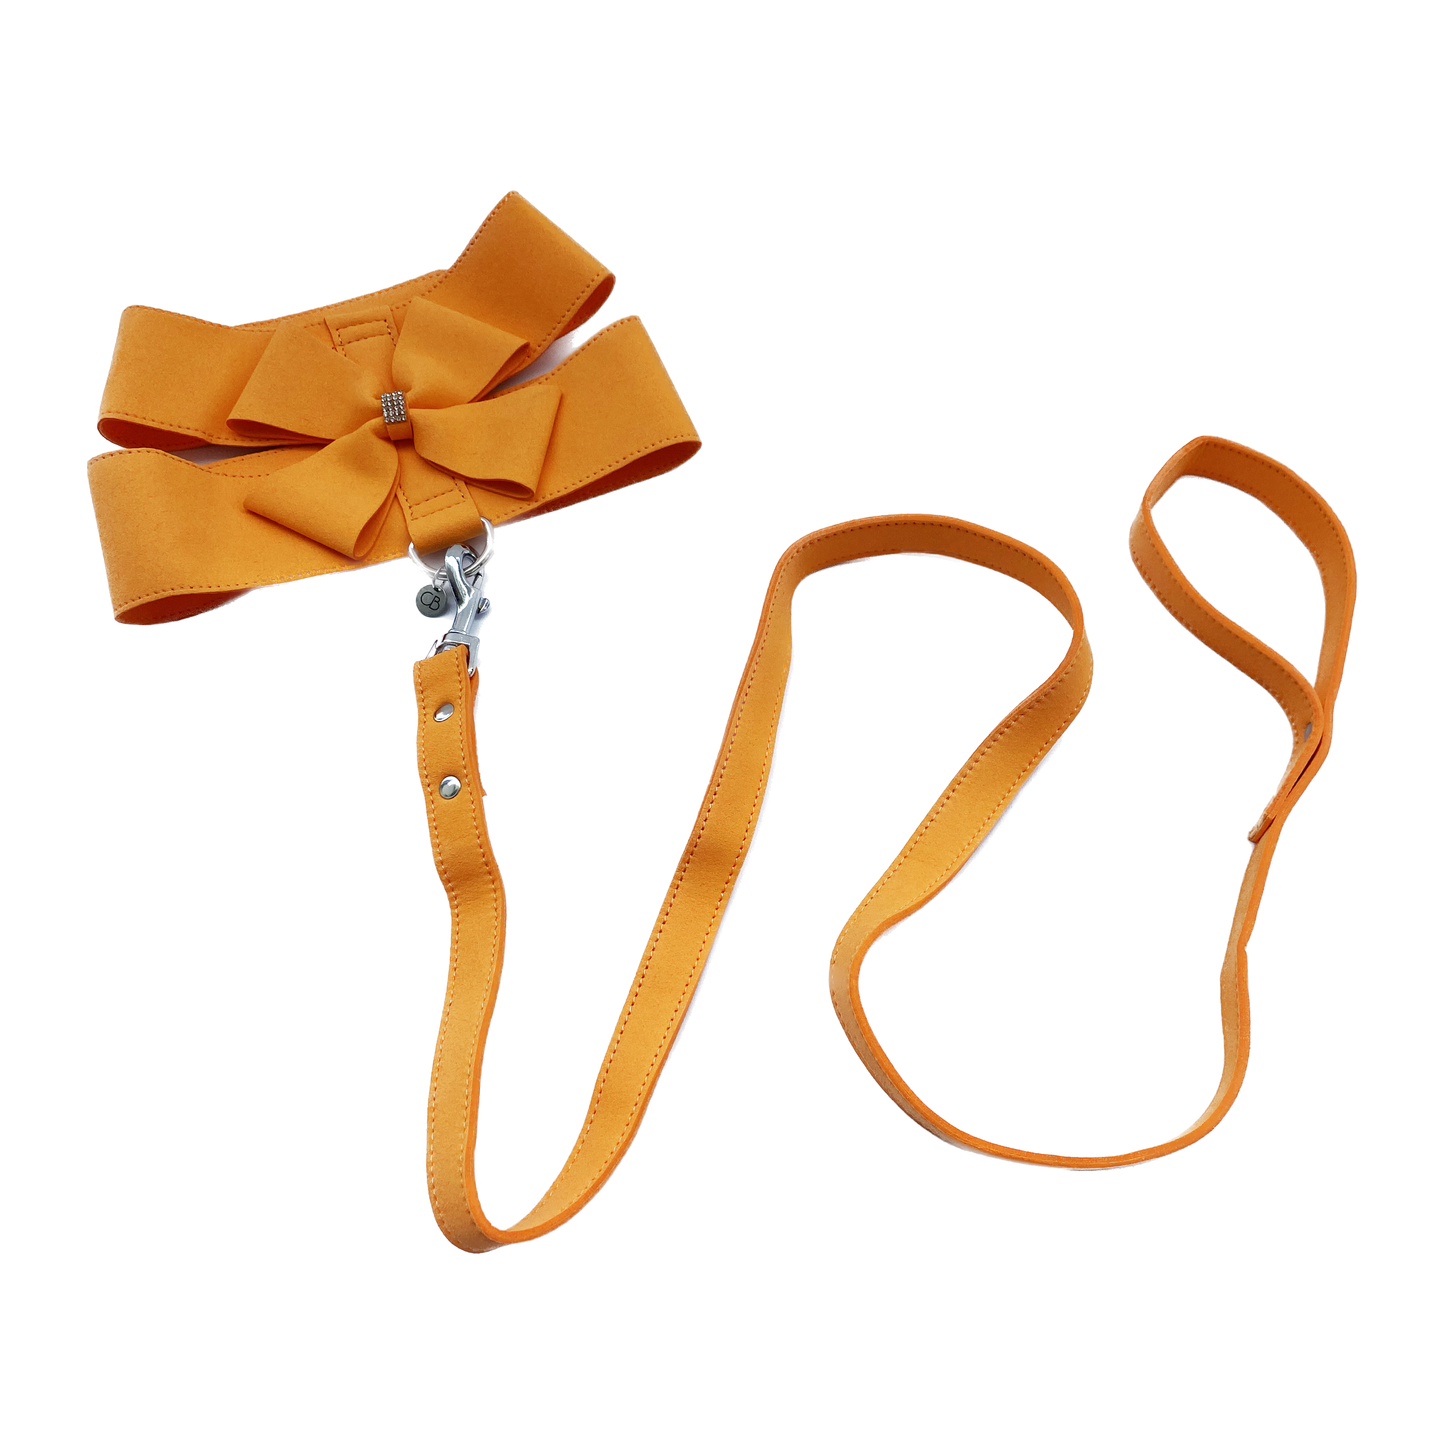 Crystal Cat/Dog Harness and Leash Set in Orange